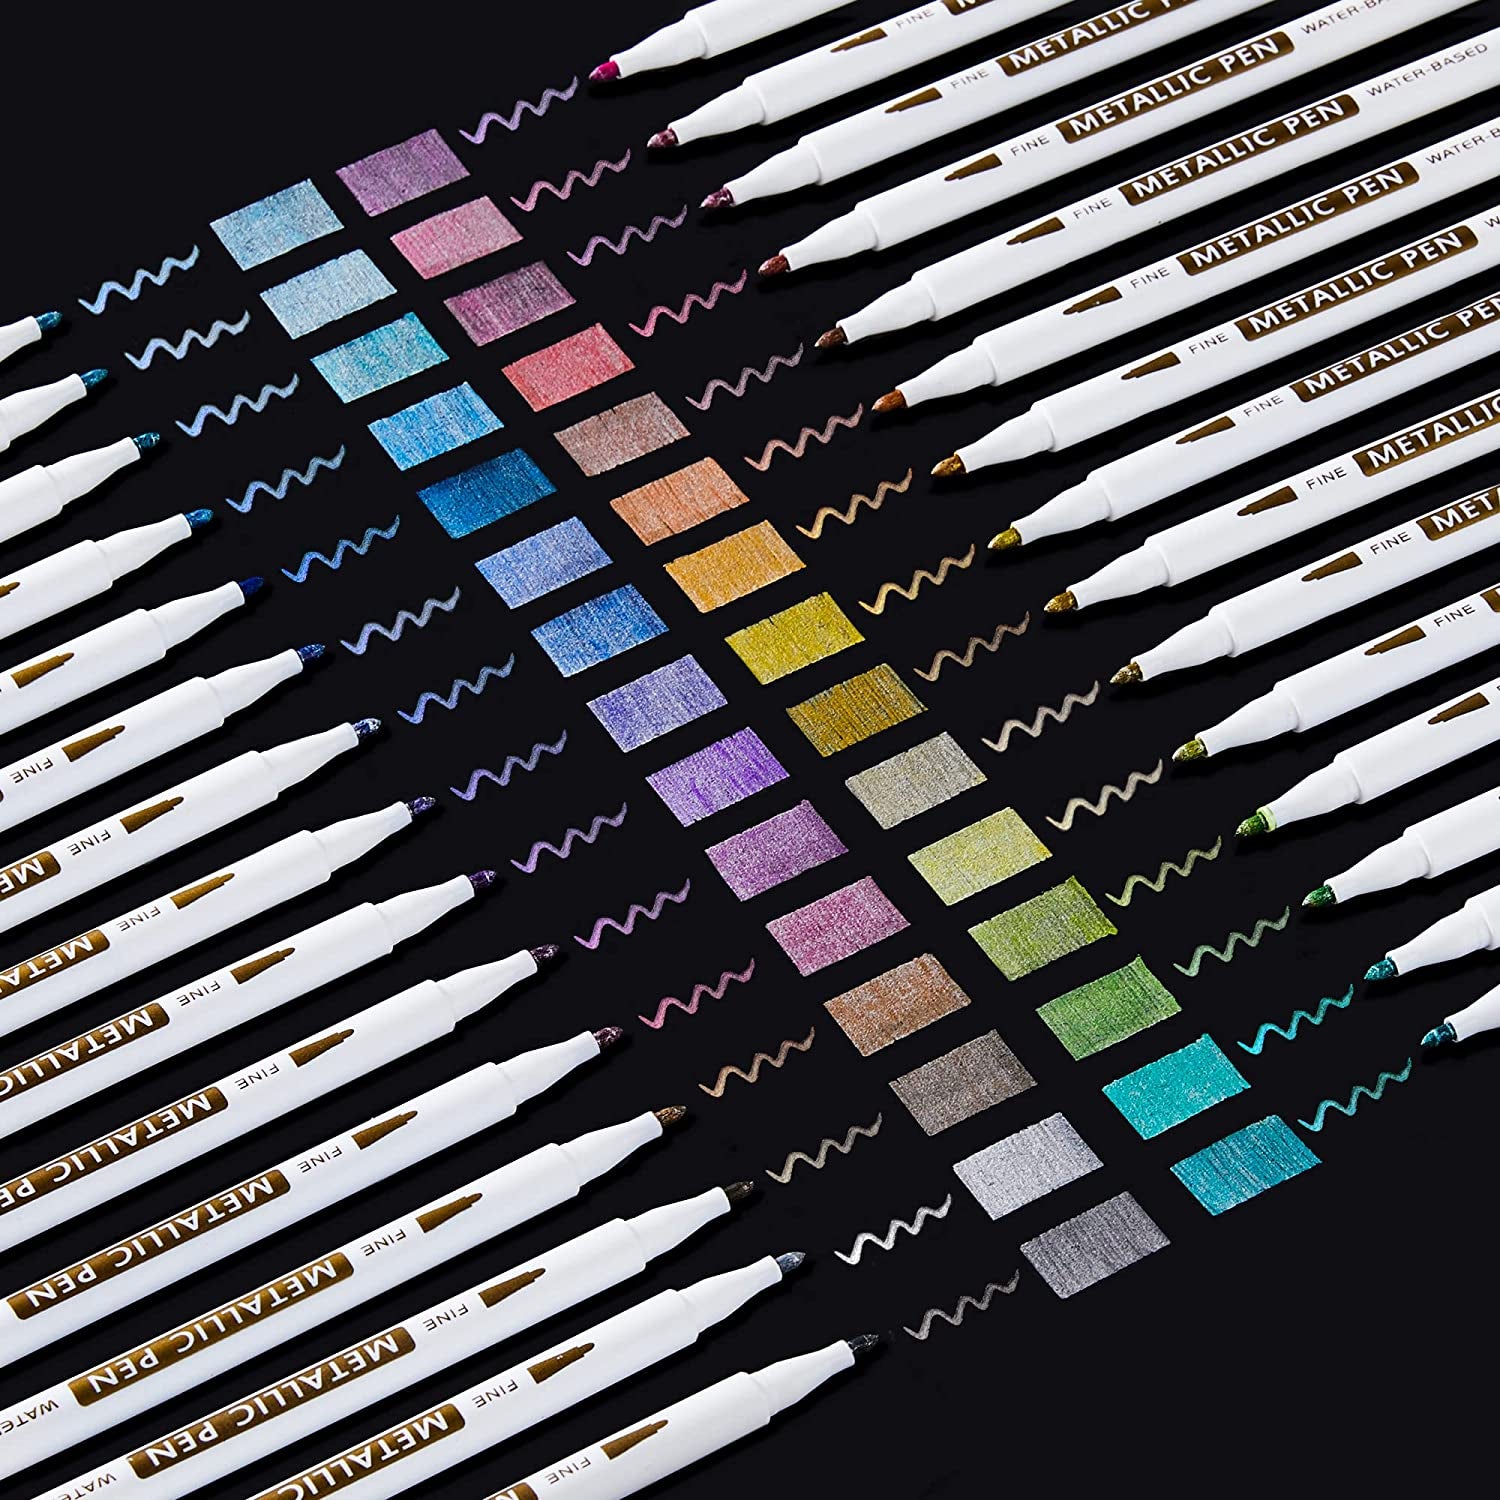 Metallic Marker Pens, 30 Colors Metallic Paint Markers with 1 Coloring Book  Fine Point for DIY Card, Calligraphy, Art and Crafting Projects, Works  Great on Black Paper, Scrapbooks, Rock